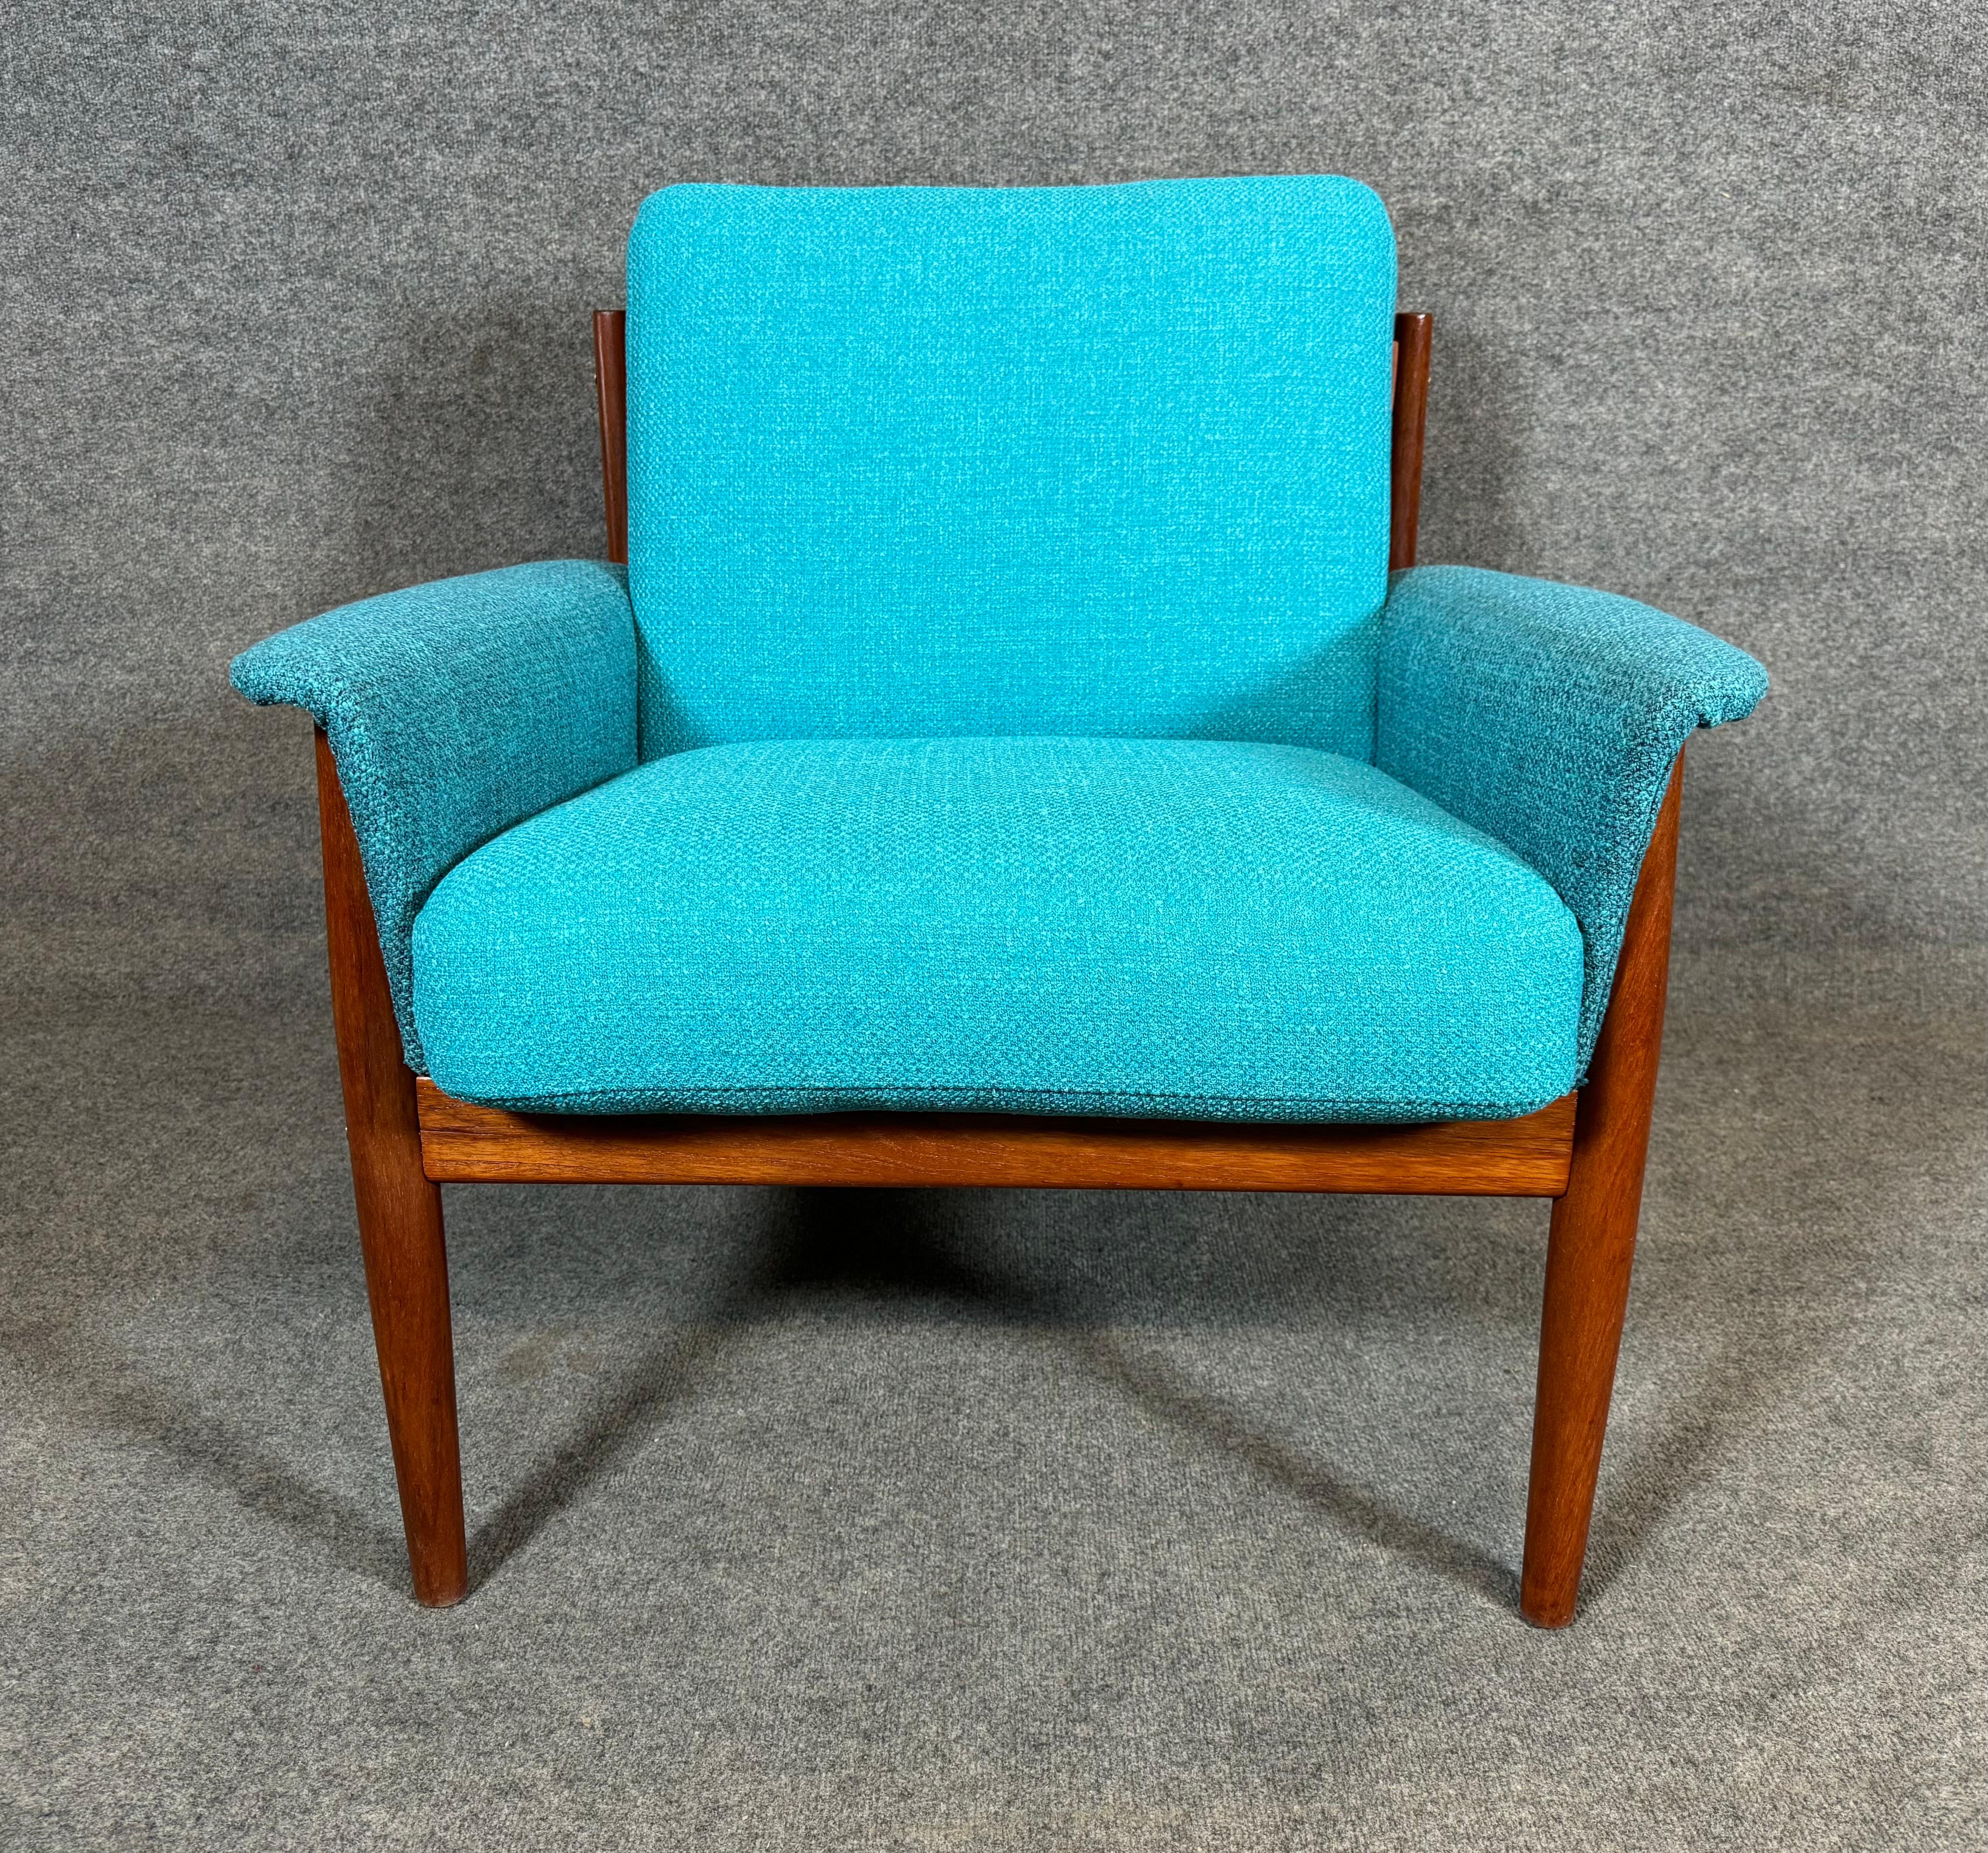 Vintage Danish Mid Century Modern Teak Lounge Chair and Ottoman by Grete Jalk In Good Condition For Sale In San Marcos, CA